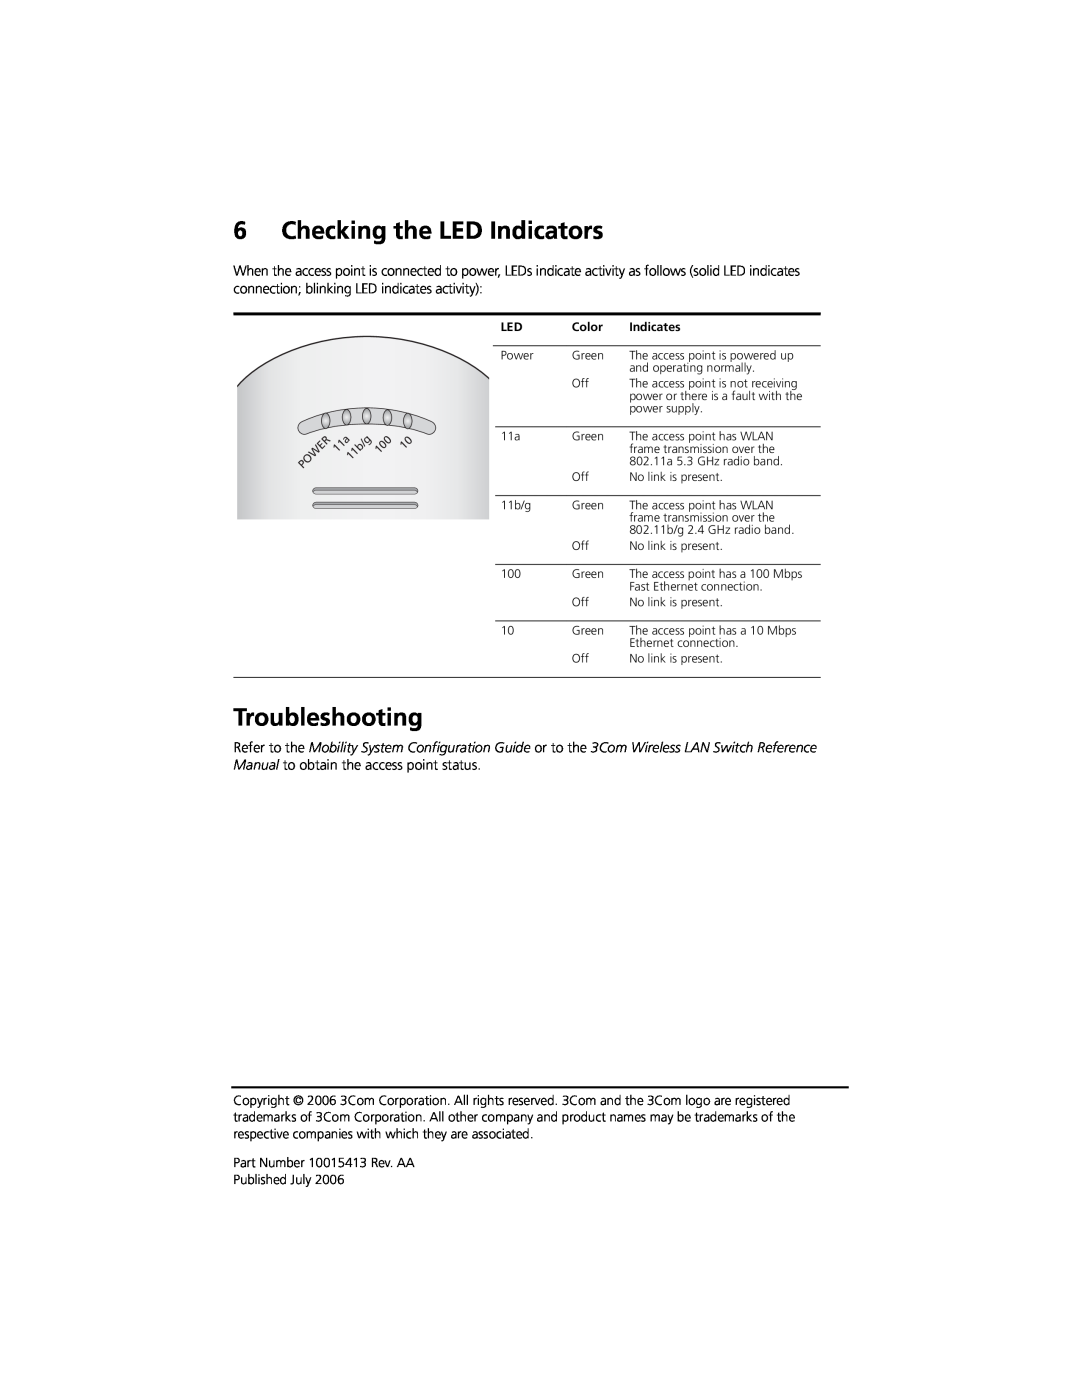 3Com AP2750 Checking the LED Indicators, Troubleshooting, Part Number 10015413 Rev. AA Published July, Color, Indicates 